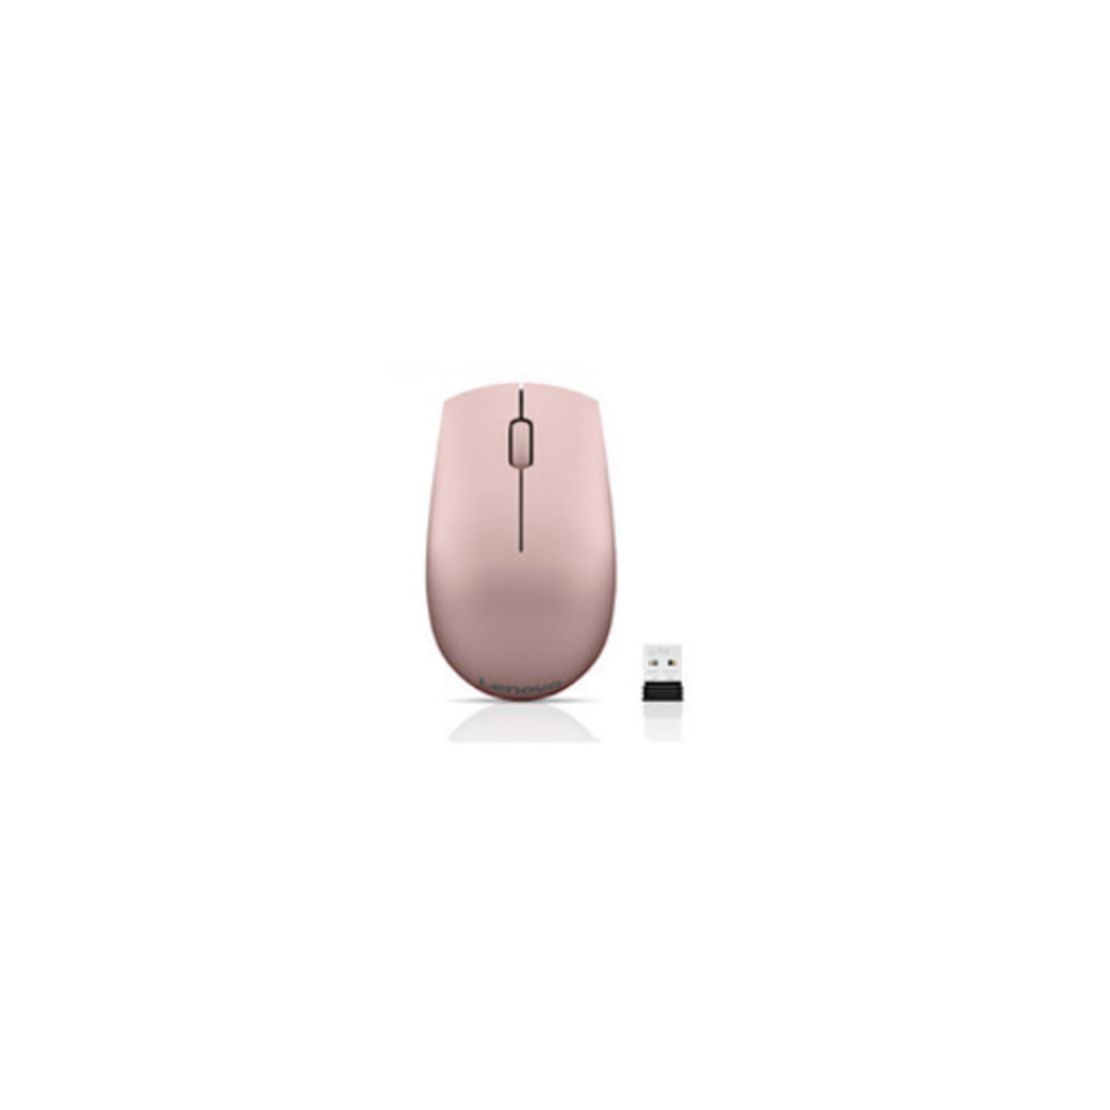 Lenovo 520 Wireless Mouse Pink - GY50T83718